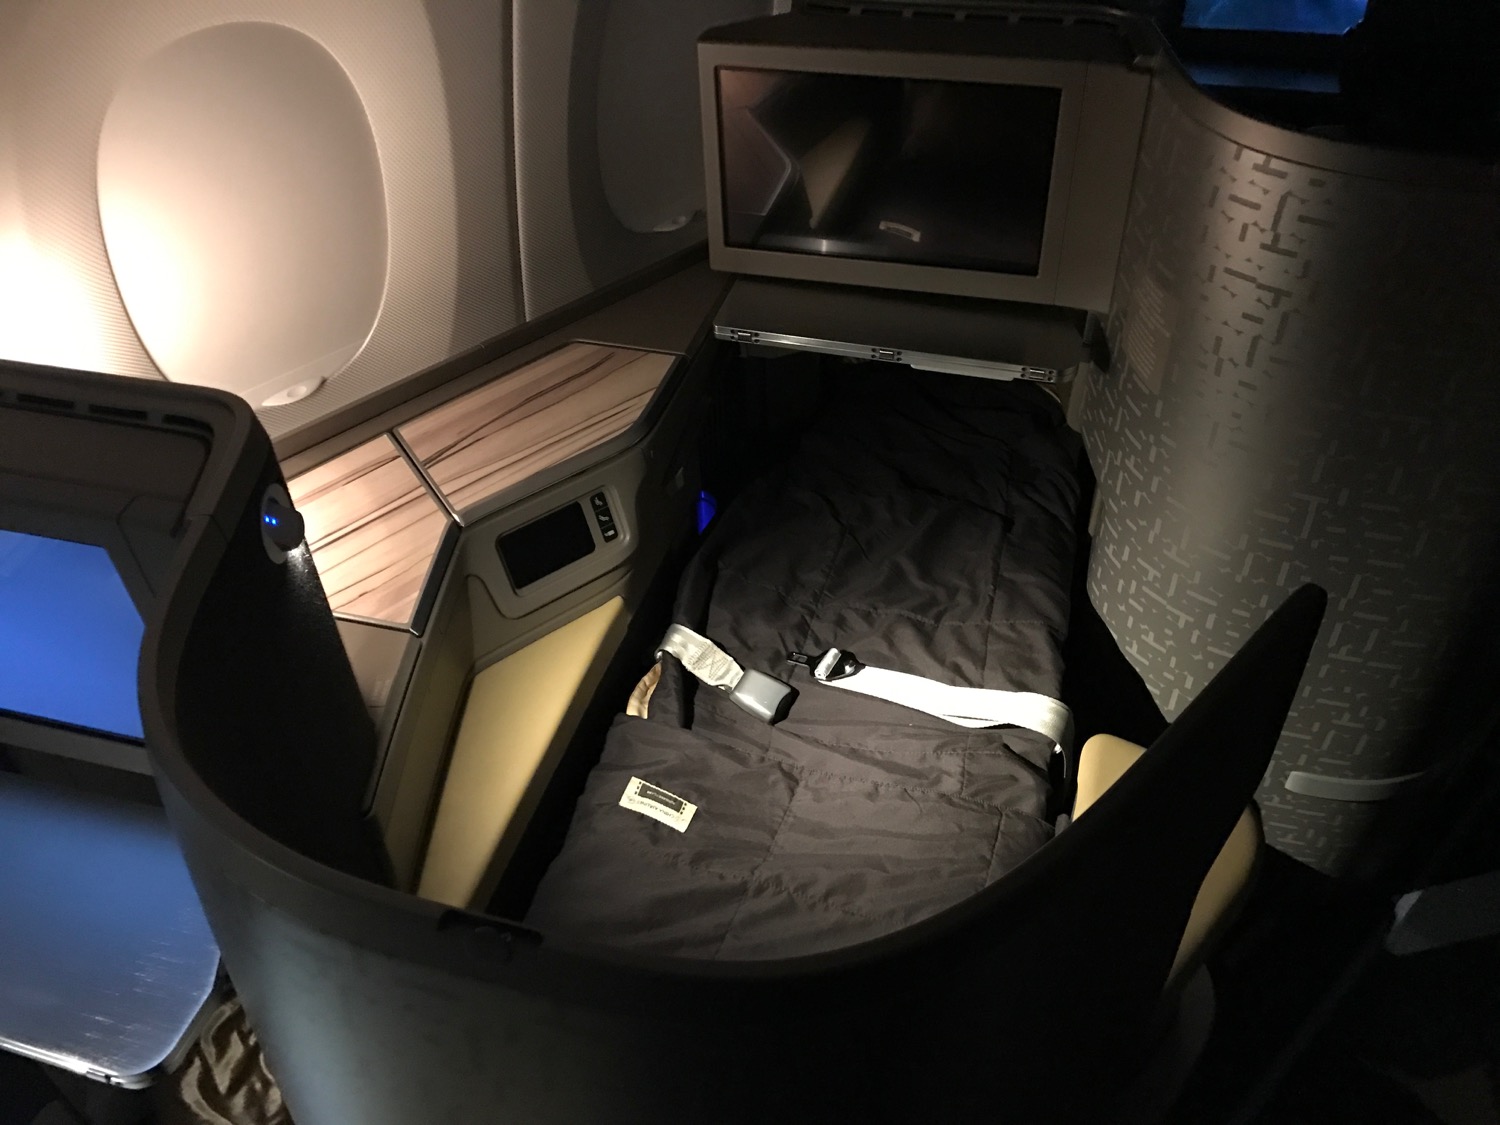 China Airlines A350 Business Class Seat.